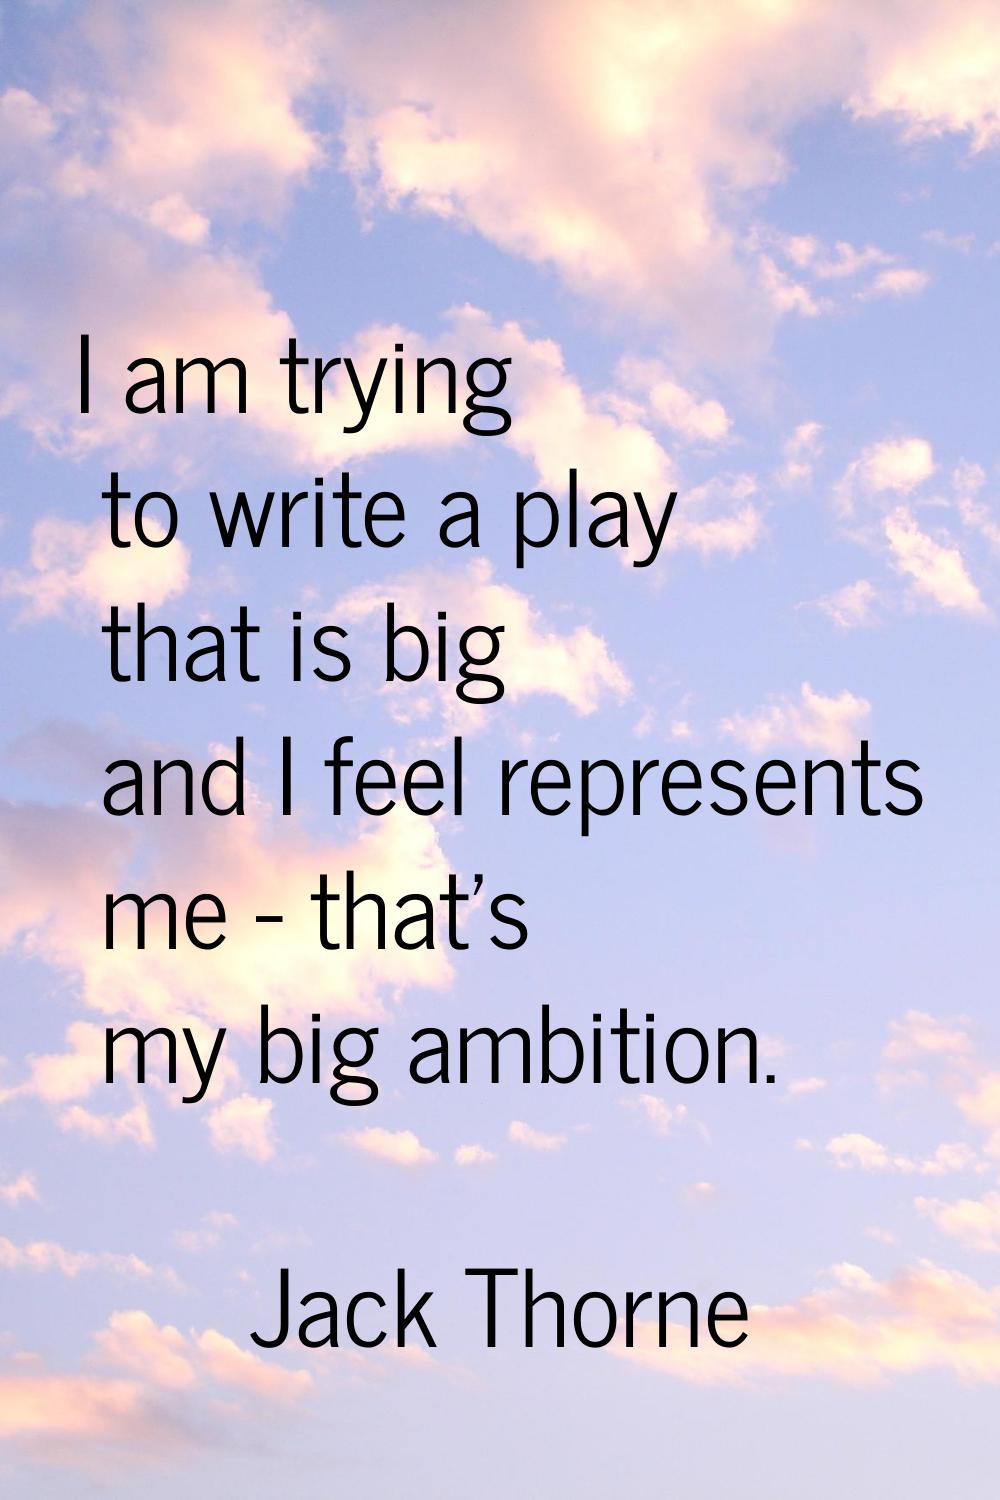 I am trying to write a play that is big and I feel represents me - that's my big ambition.